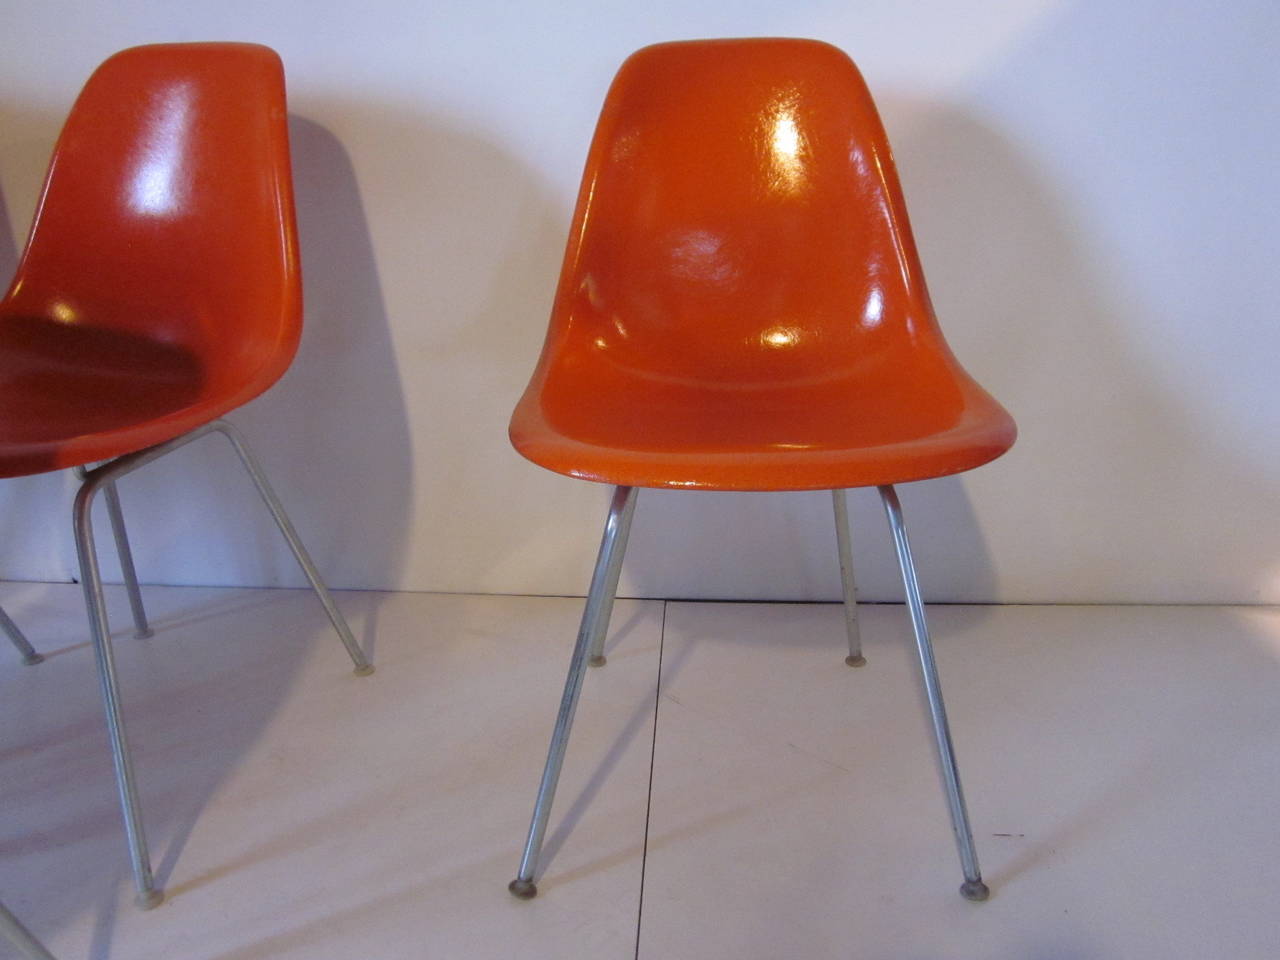 A set of six matching Eames bright orange fiberglass scoop chair sitting on zinc H-bases with white nylon feet. Retains some of the paper labels and impressed manufactures mark Herman Miller Furniture Company molded to the bottom.